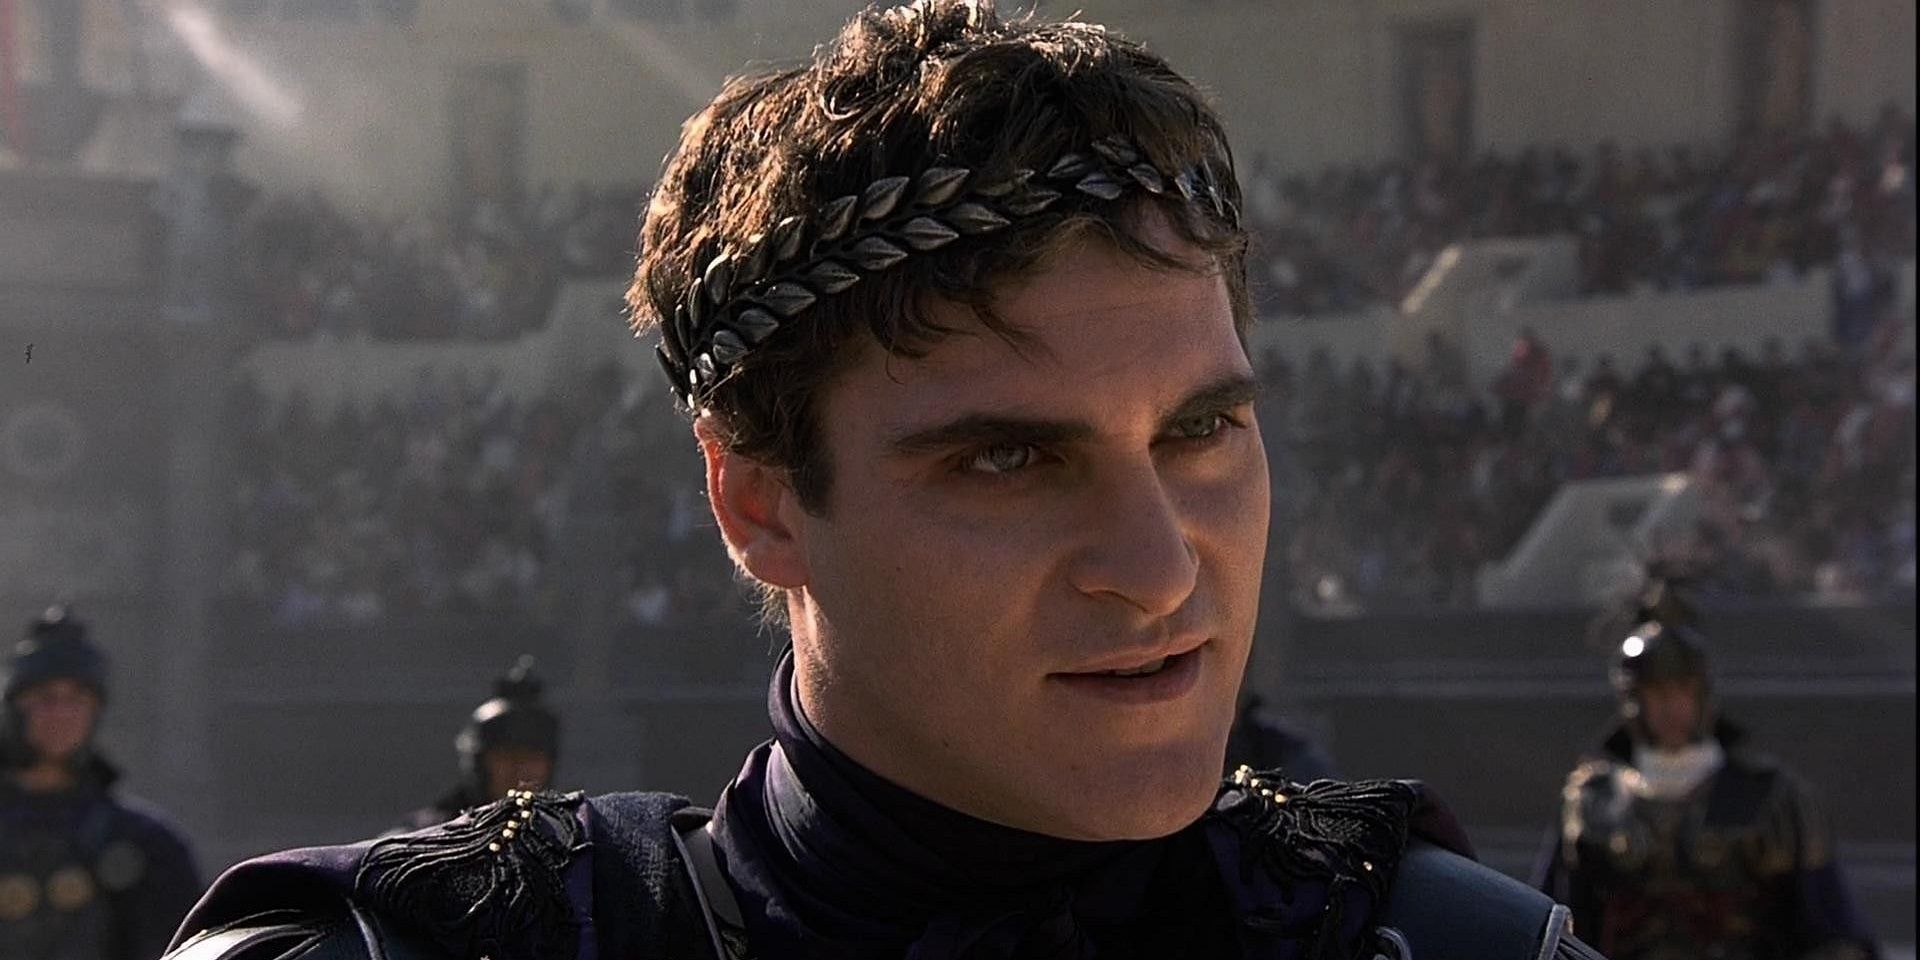 Emperor Commodus looking angry in Gladiator in arena